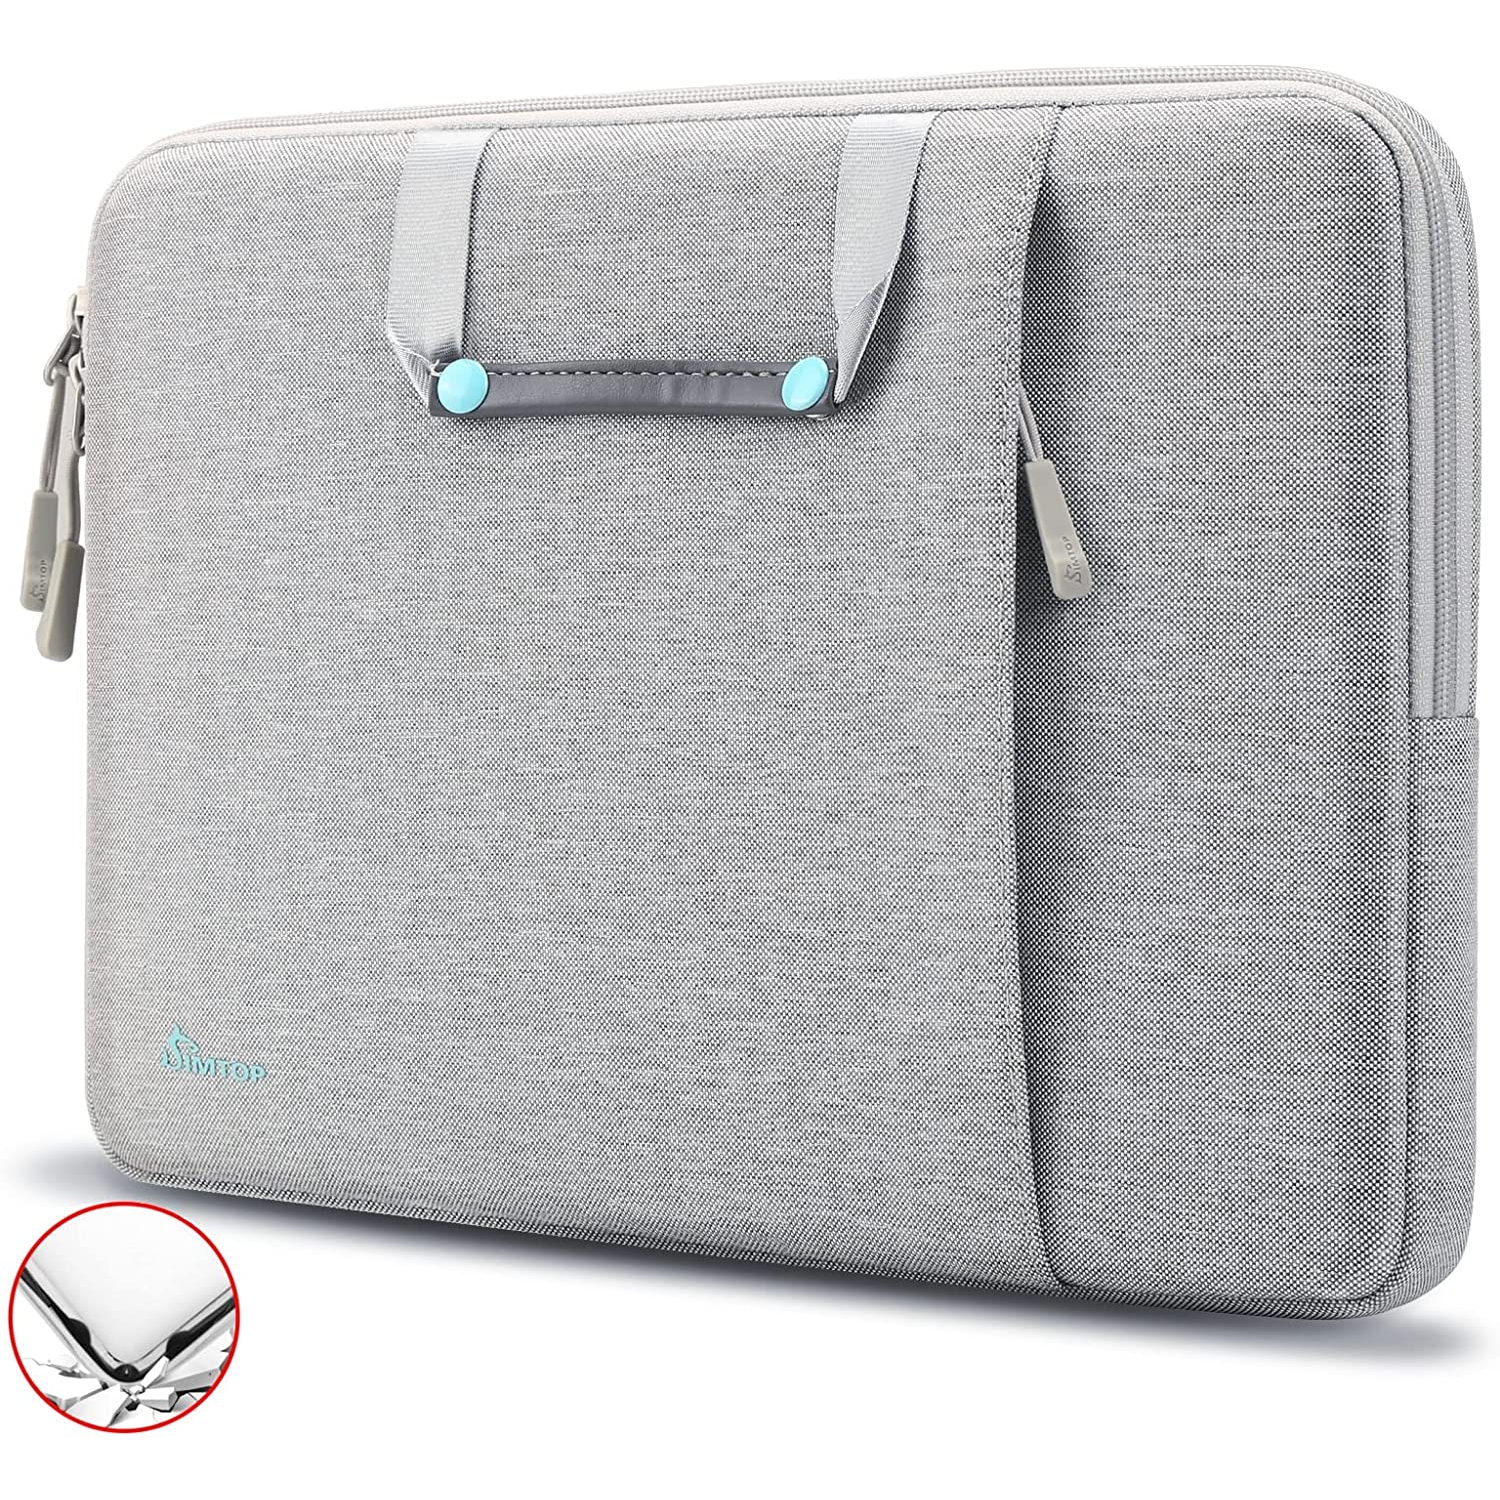 Laptop Sleeve for 15 Inch Microsoft Surface Laptop 4/3, Laptop Case 2020 Dell XPS 15, 15 inch MacBook Pro A1990 A1707,